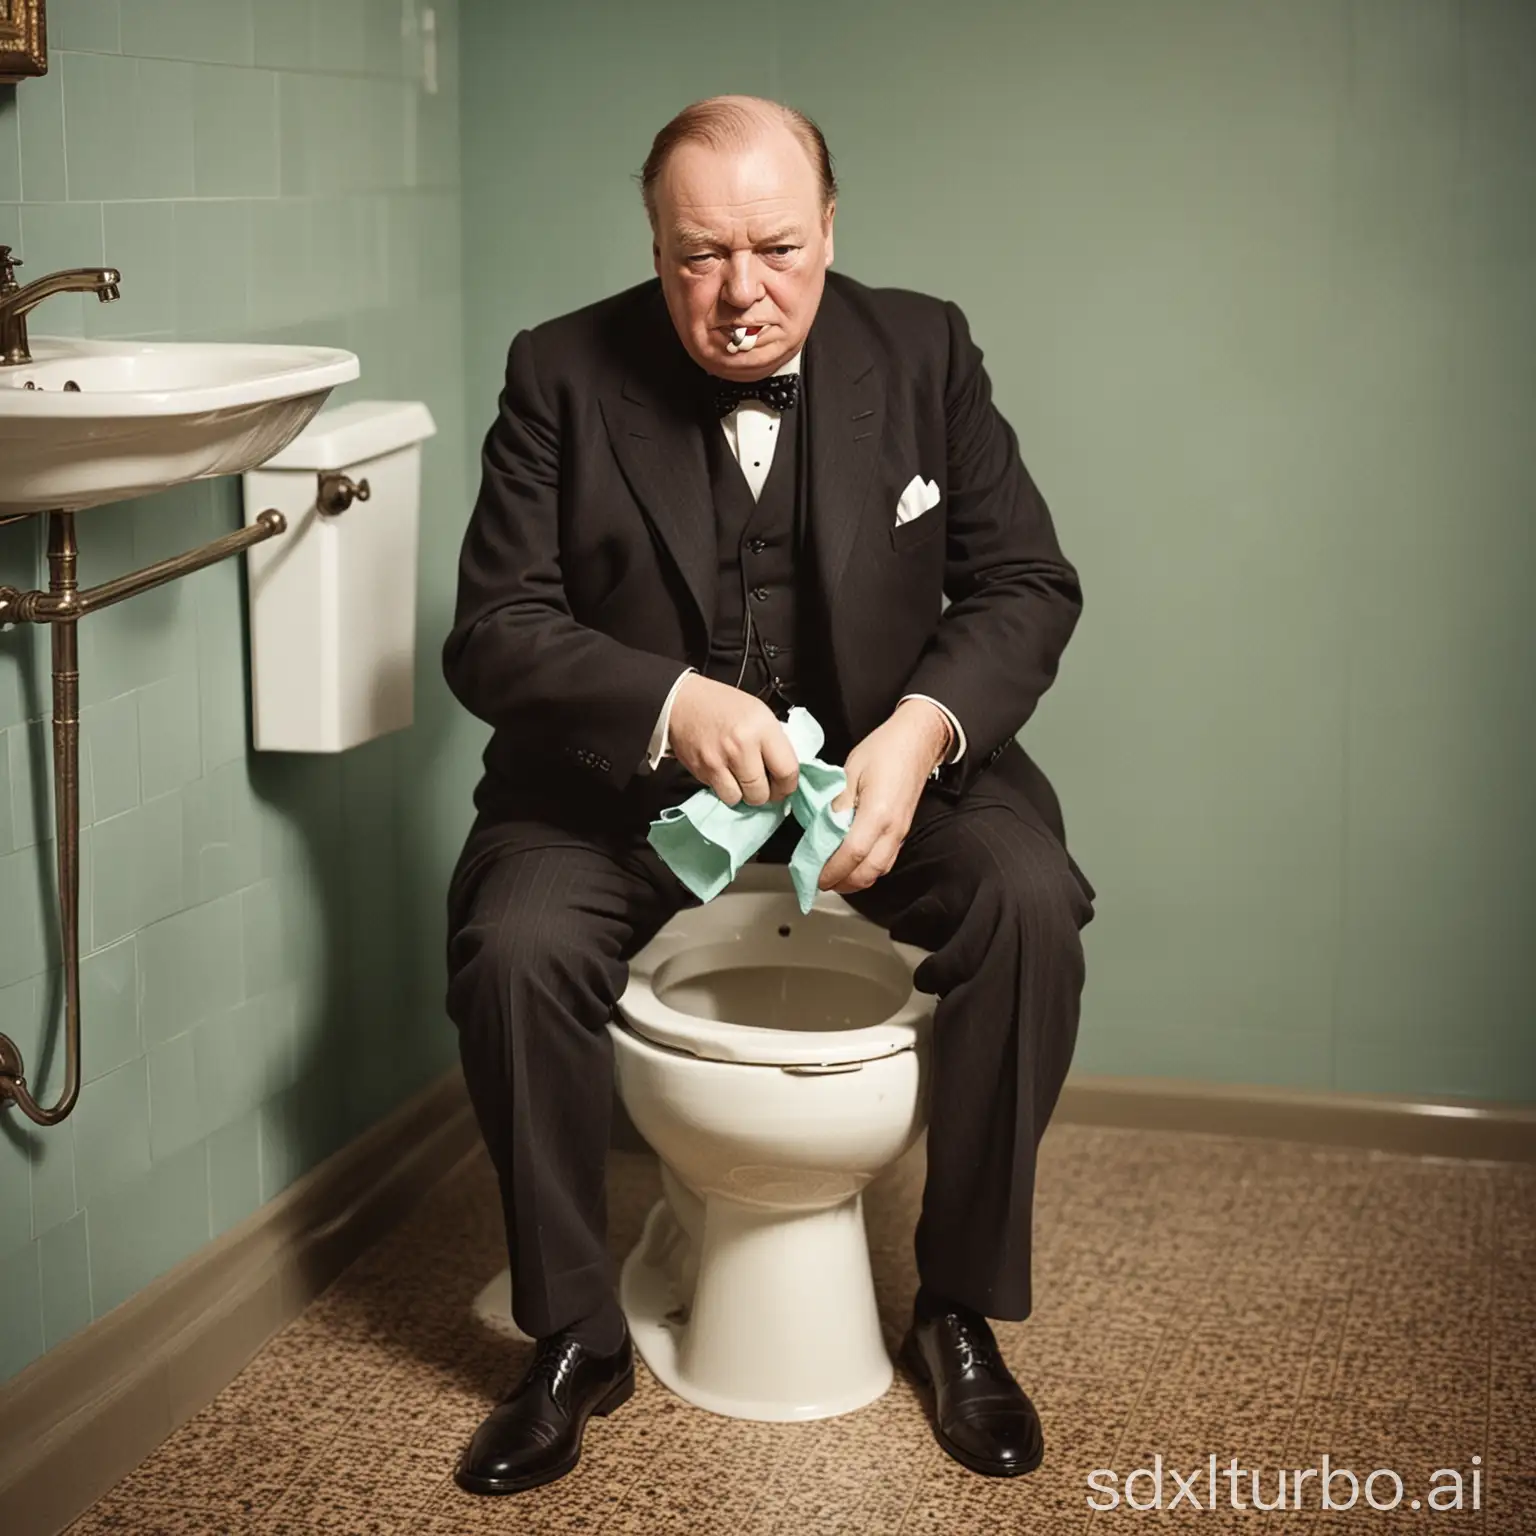 Old color photo of Winston Churchill cleaning the toilet